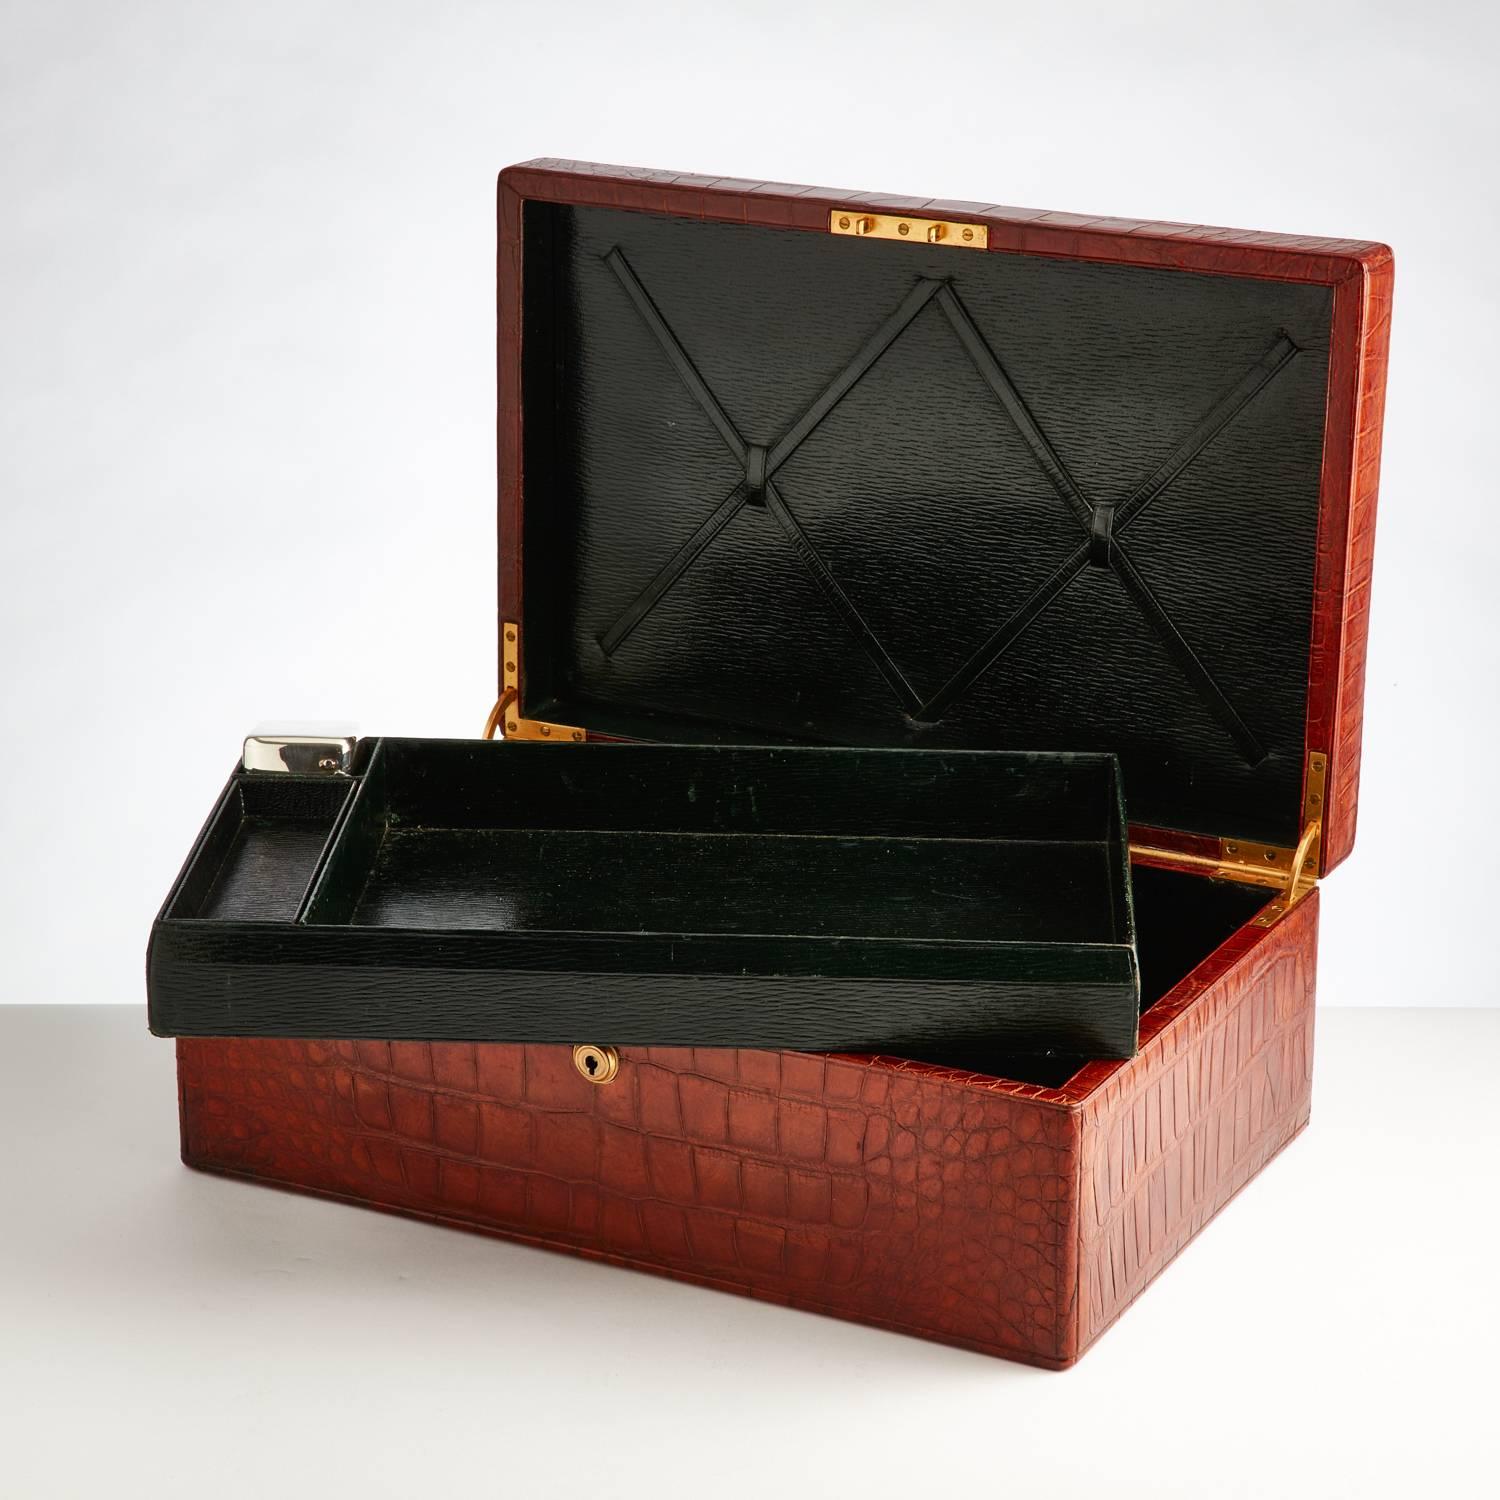 A large stunning vintage crocodile document box in excellent condition with gilded recessed carrying handle and a brahma spring lock with key.
The exterior colour is London tan and there is just a slight colour difference to the bottom front left